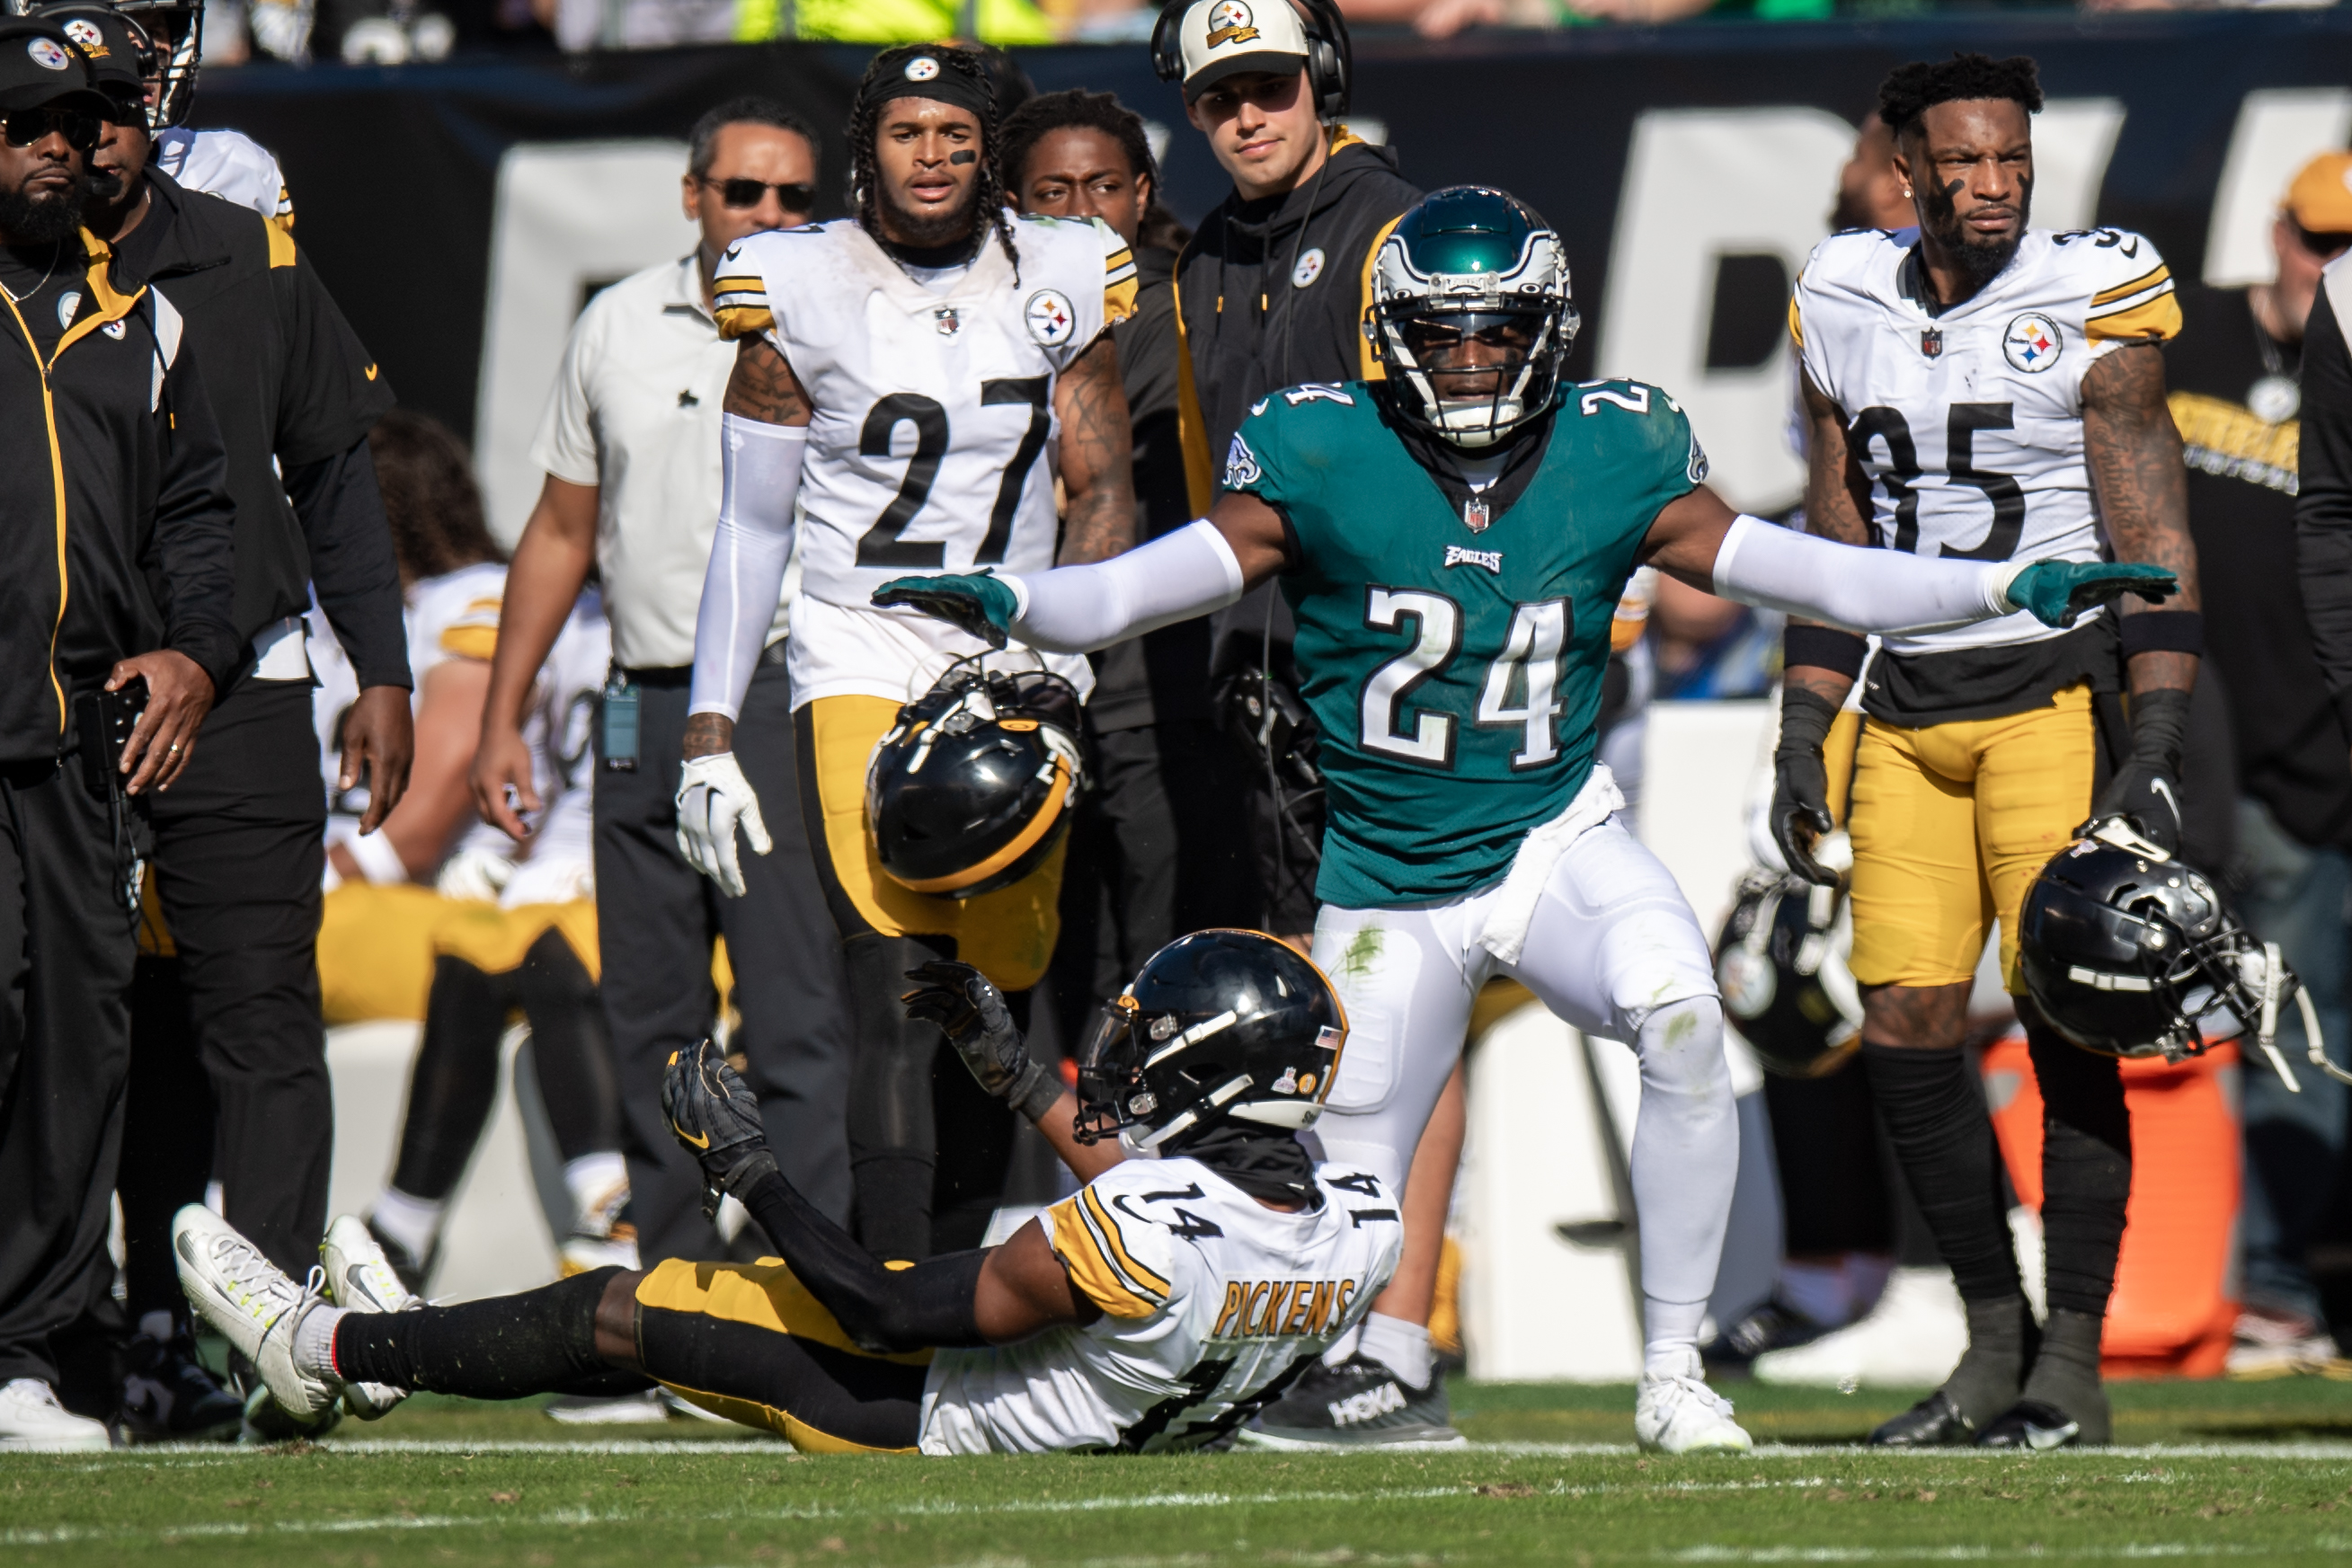 Cornerback James Bradberry (#24) of the Phiadelphia Eagles breaks up a pass of the Pittsburgh Steelers in the game at Lincoln Financial Field in Philadelphia, Pennsylvania, October 30, 2022. /CFP